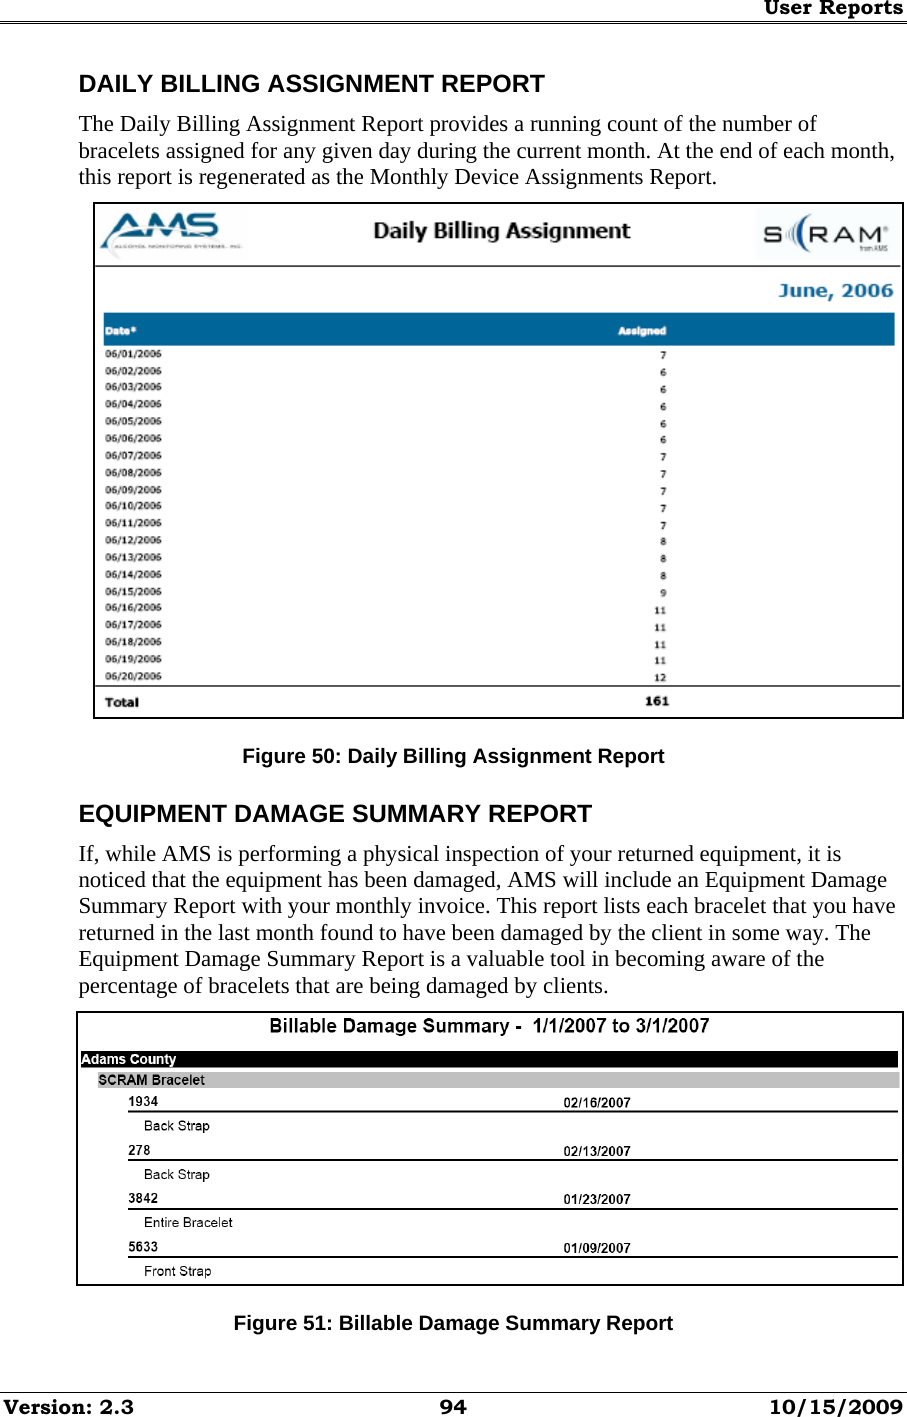 User Reports Version: 2.3  94  10/15/2009 DAILY BILLING ASSIGNMENT REPORT The Daily Billing Assignment Report provides a running count of the number of bracelets assigned for any given day during the current month. At the end of each month, this report is regenerated as the Monthly Device Assignments Report.  Figure 50: Daily Billing Assignment Report EQUIPMENT DAMAGE SUMMARY REPORT If, while AMS is performing a physical inspection of your returned equipment, it is noticed that the equipment has been damaged, AMS will include an Equipment Damage Summary Report with your monthly invoice. This report lists each bracelet that you have returned in the last month found to have been damaged by the client in some way. The Equipment Damage Summary Report is a valuable tool in becoming aware of the percentage of bracelets that are being damaged by clients.  Figure 51: Billable Damage Summary Report 